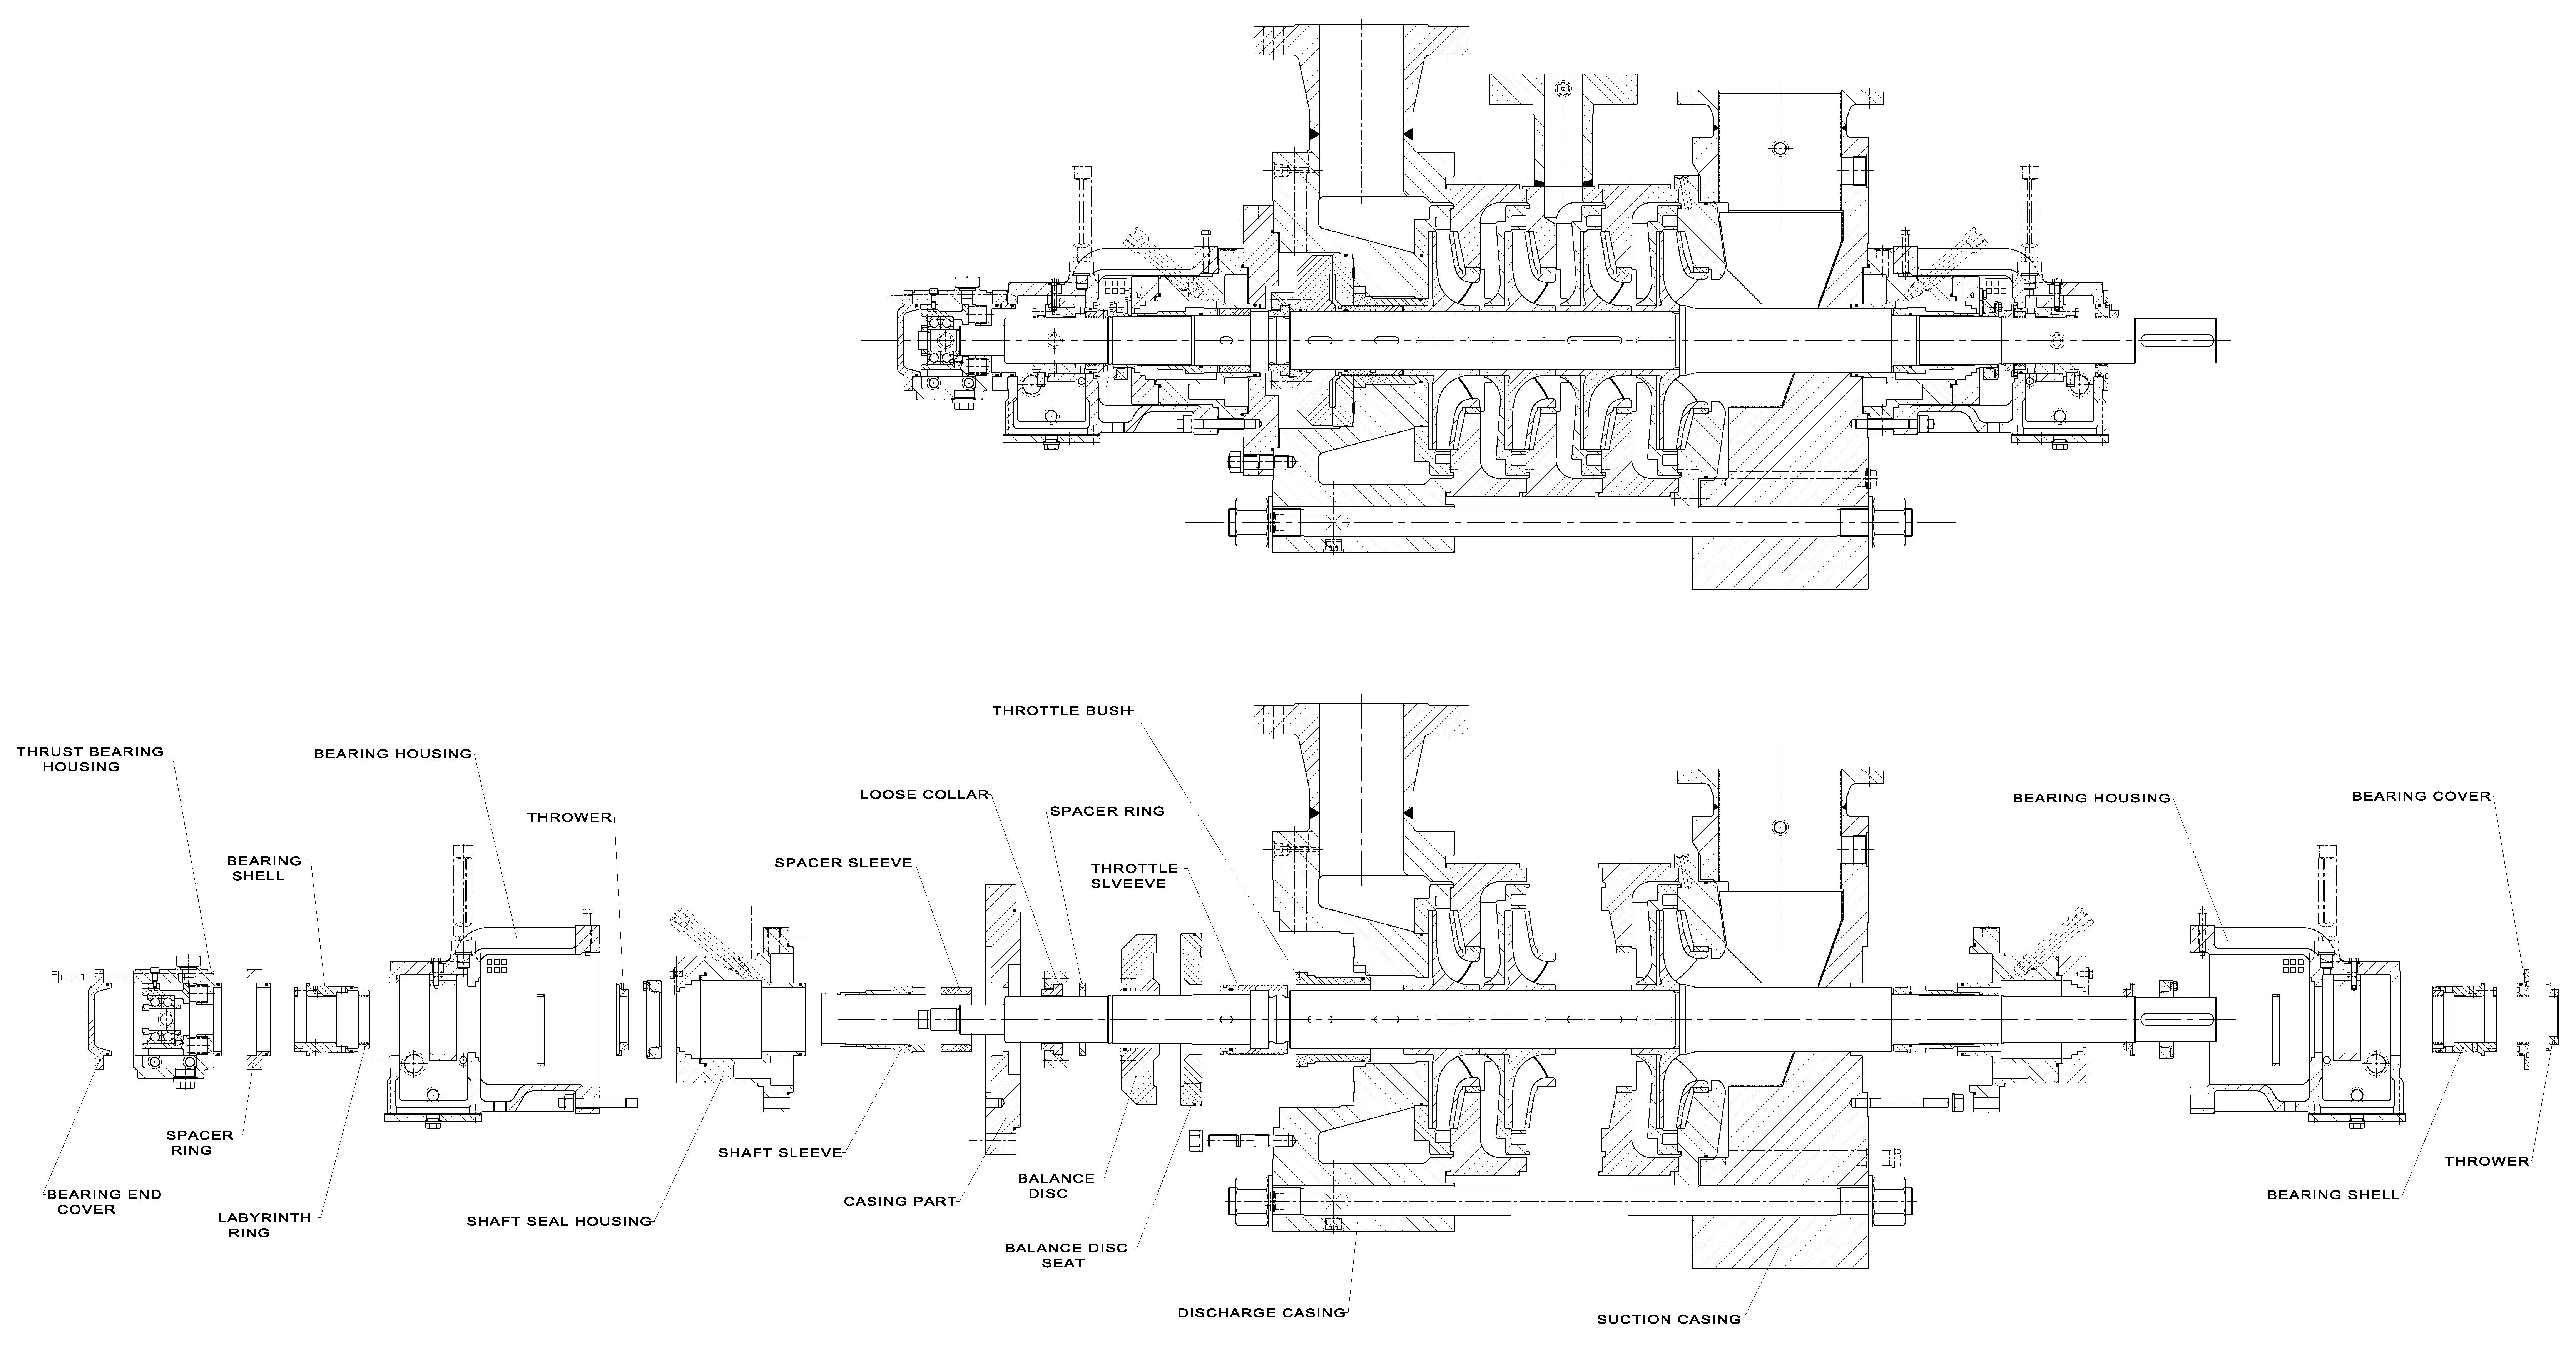 IMAGE 6: Exploded view of a multistage pump